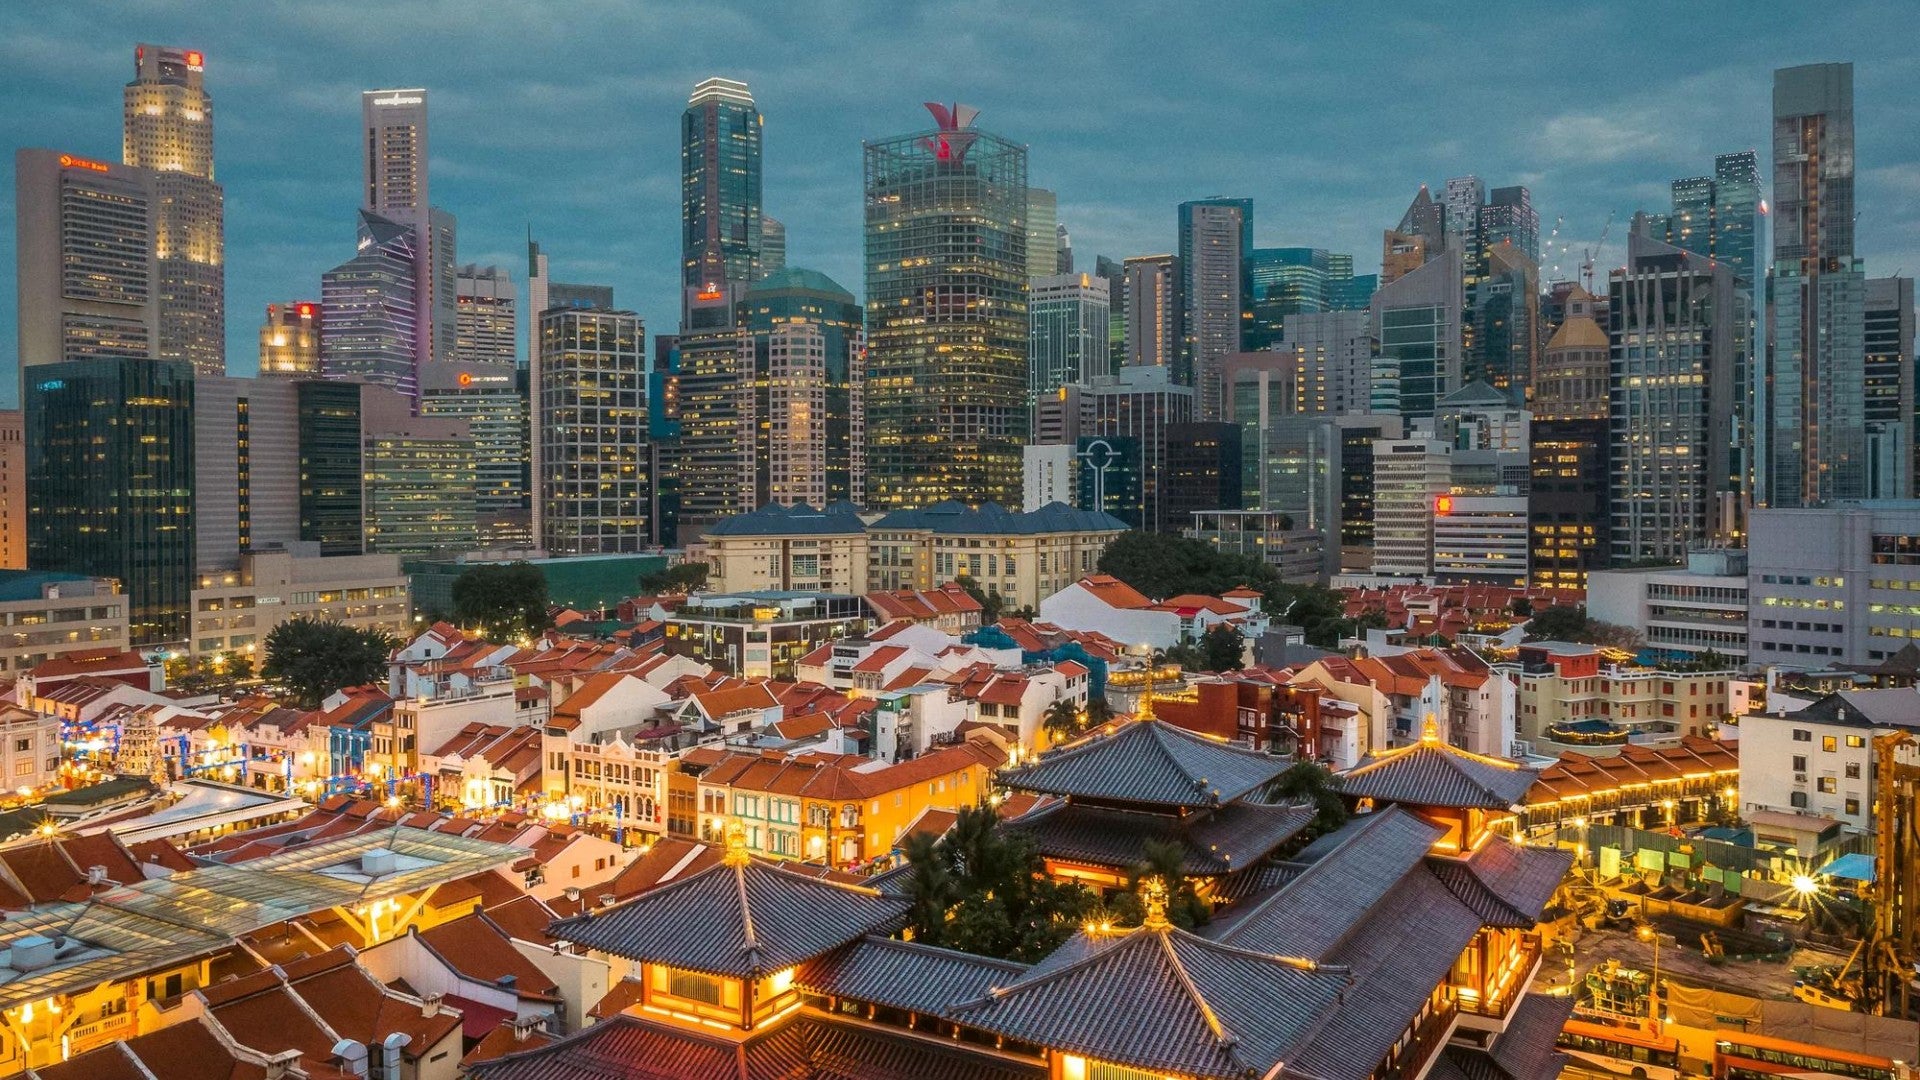 Singapore's Chinatown and financial district, featuring old and new urban development